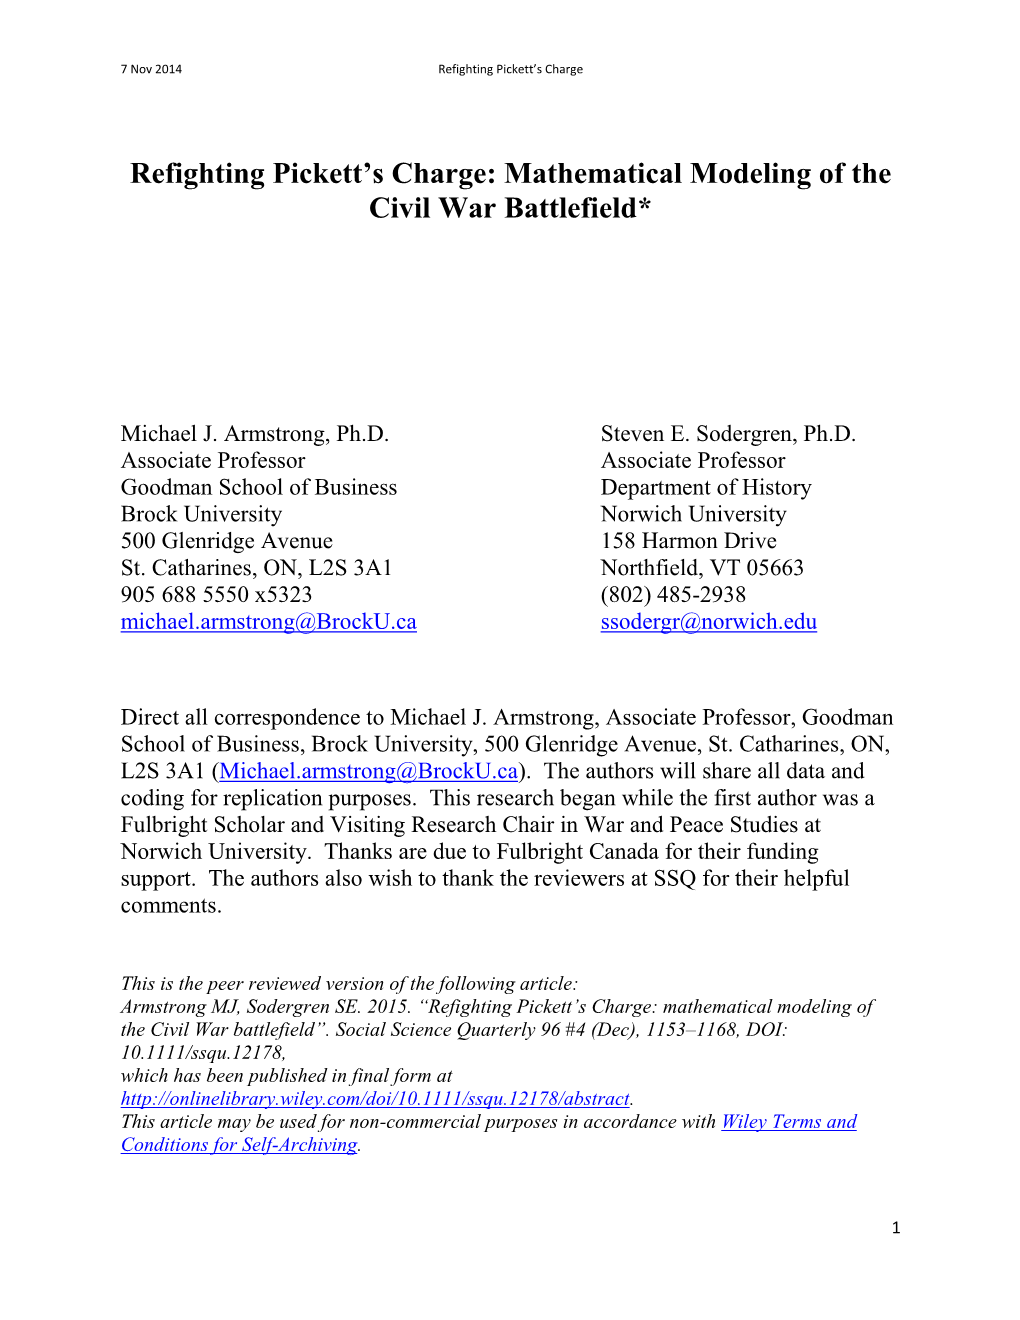 Refighting Pickett's Charge: Mathematical Modeling of the Civil